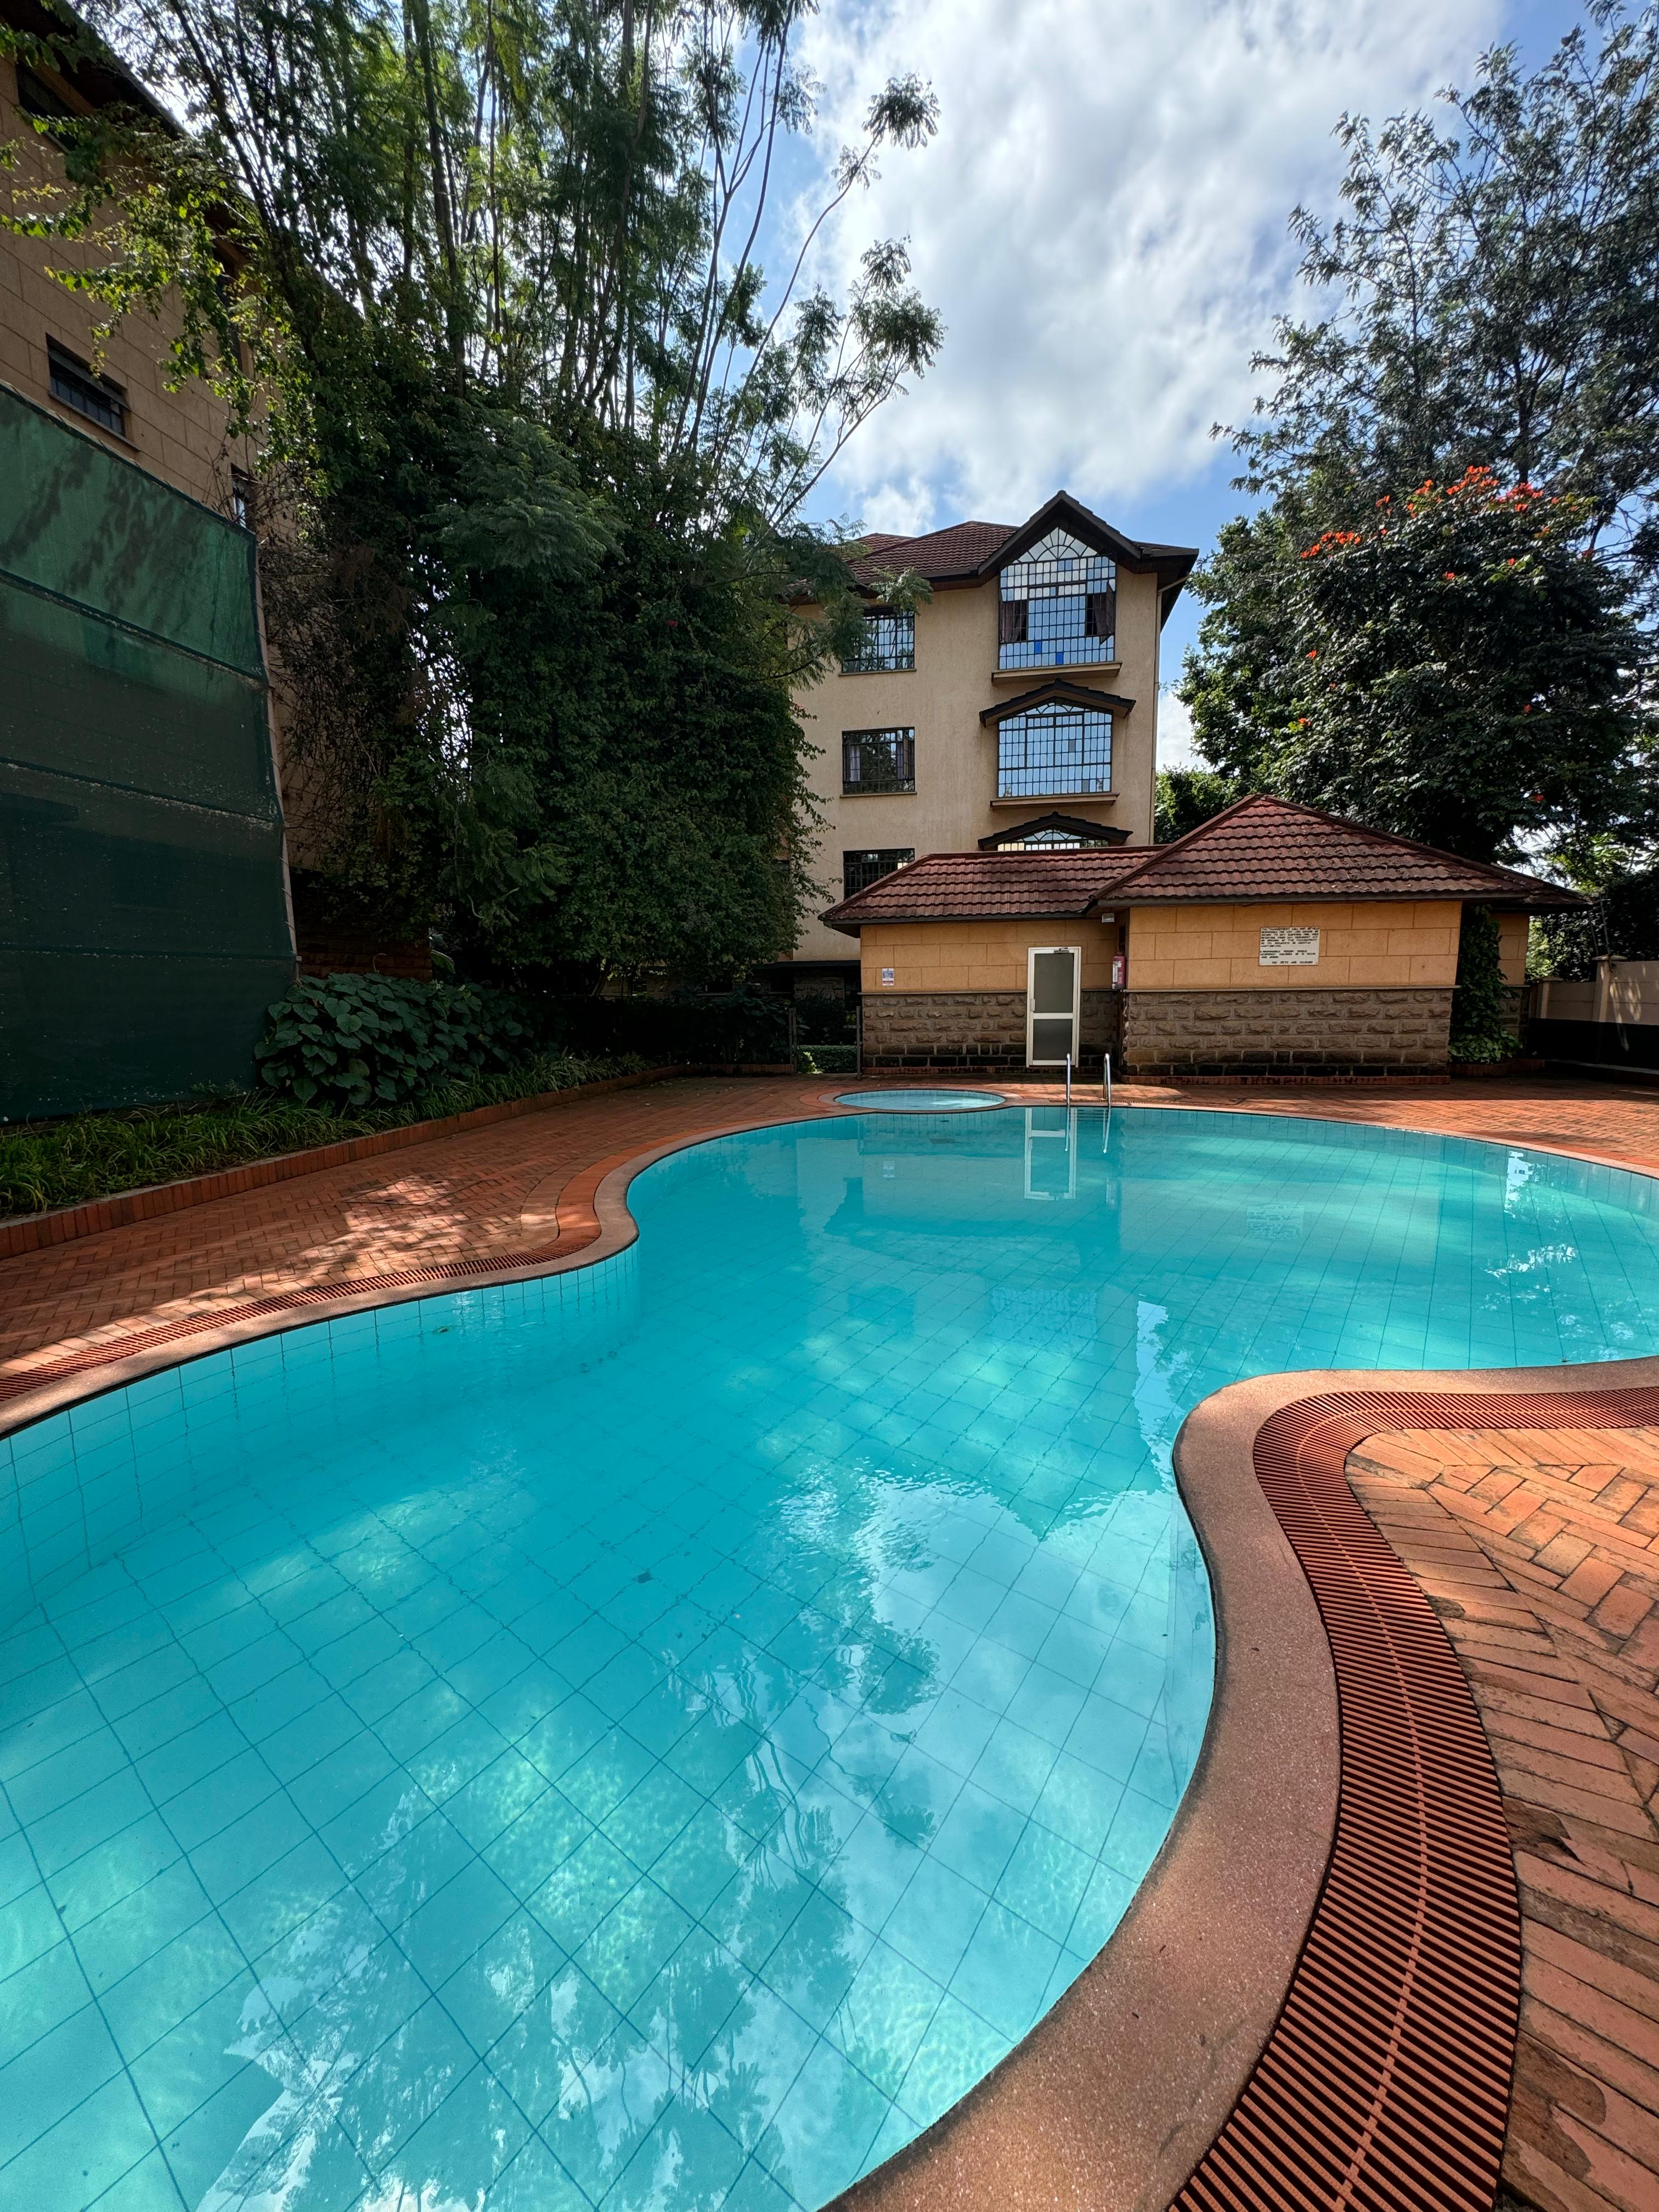 Spacious 3 Bedroom Apartment Plus DSQ For Sale in Lavington. Has swimming pool, sauna, garden, and Kid's play area. Asking price: 40M. Musilli Homes